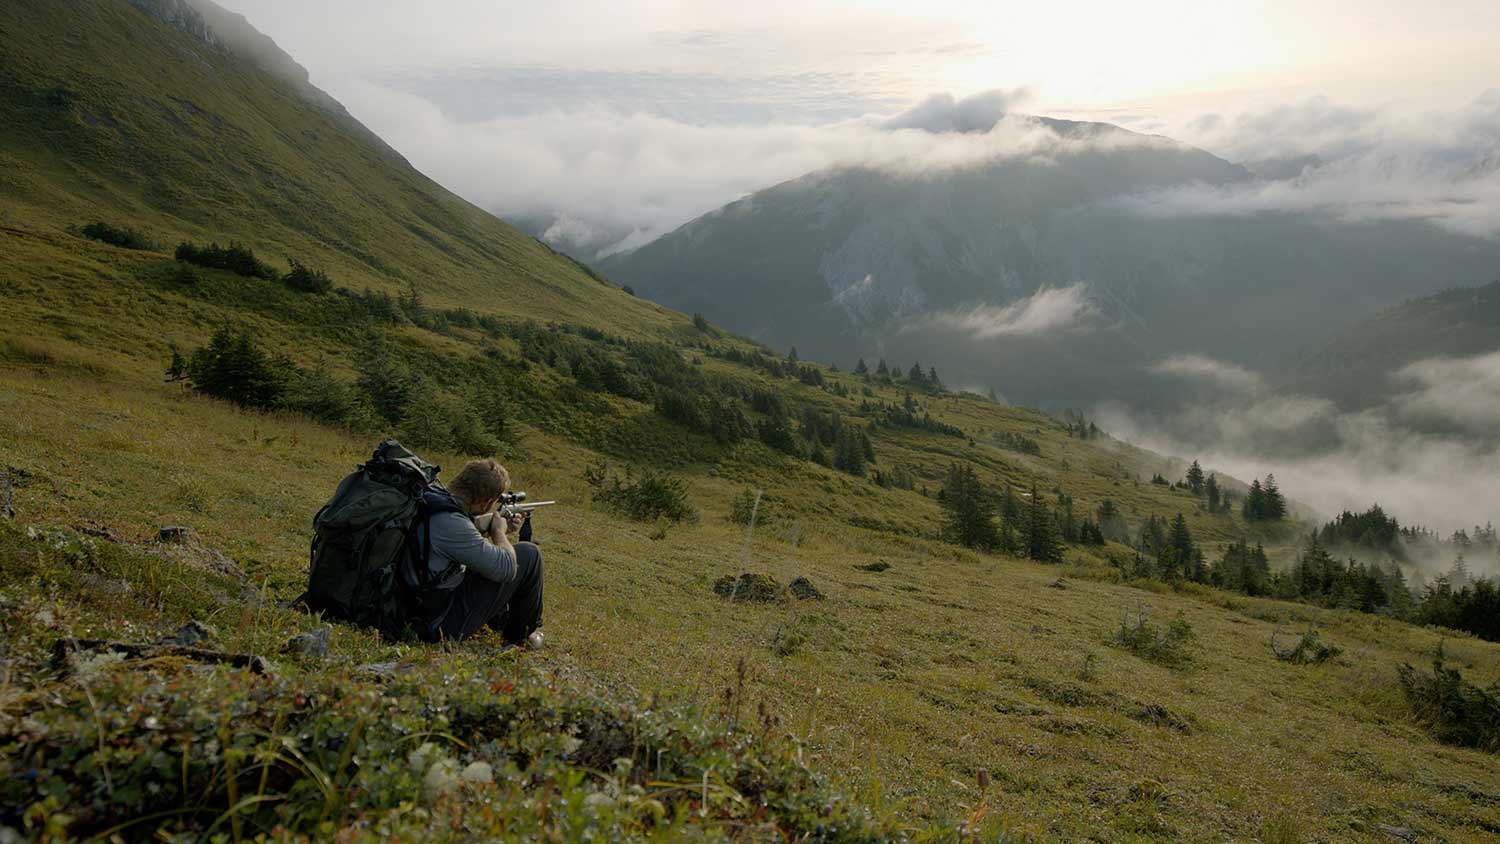 The Wildest Hunt: A Film About the Tongass National Forest